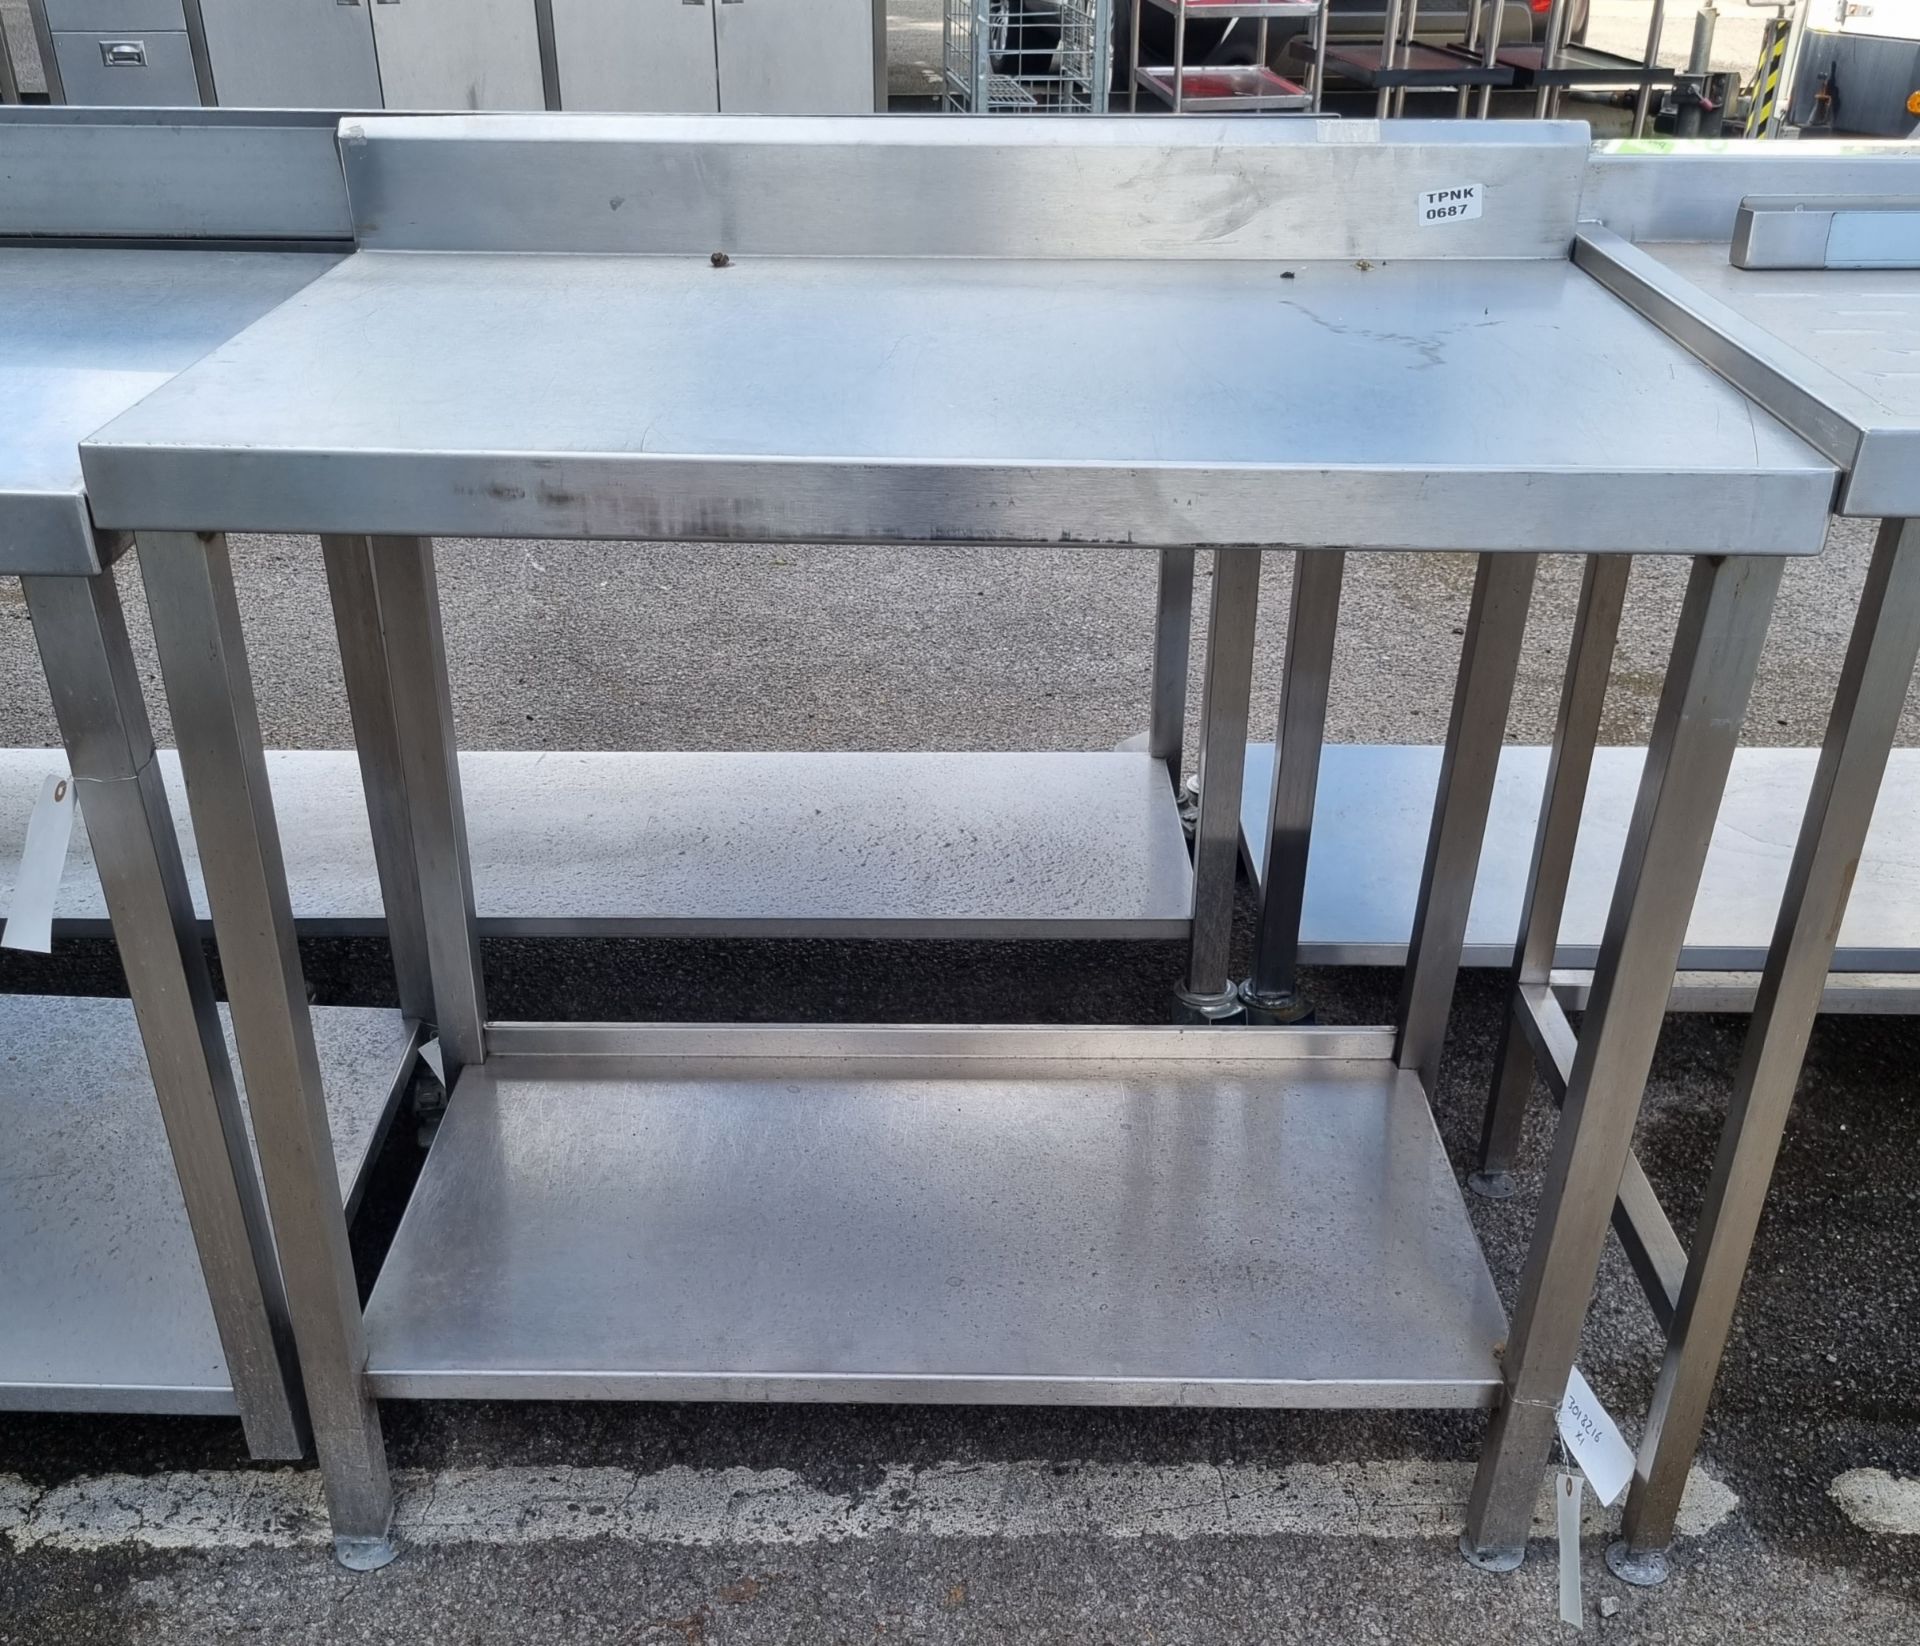 Stainless steel table with bottom shelf - L100 x W65 x H100cm - Image 2 of 2